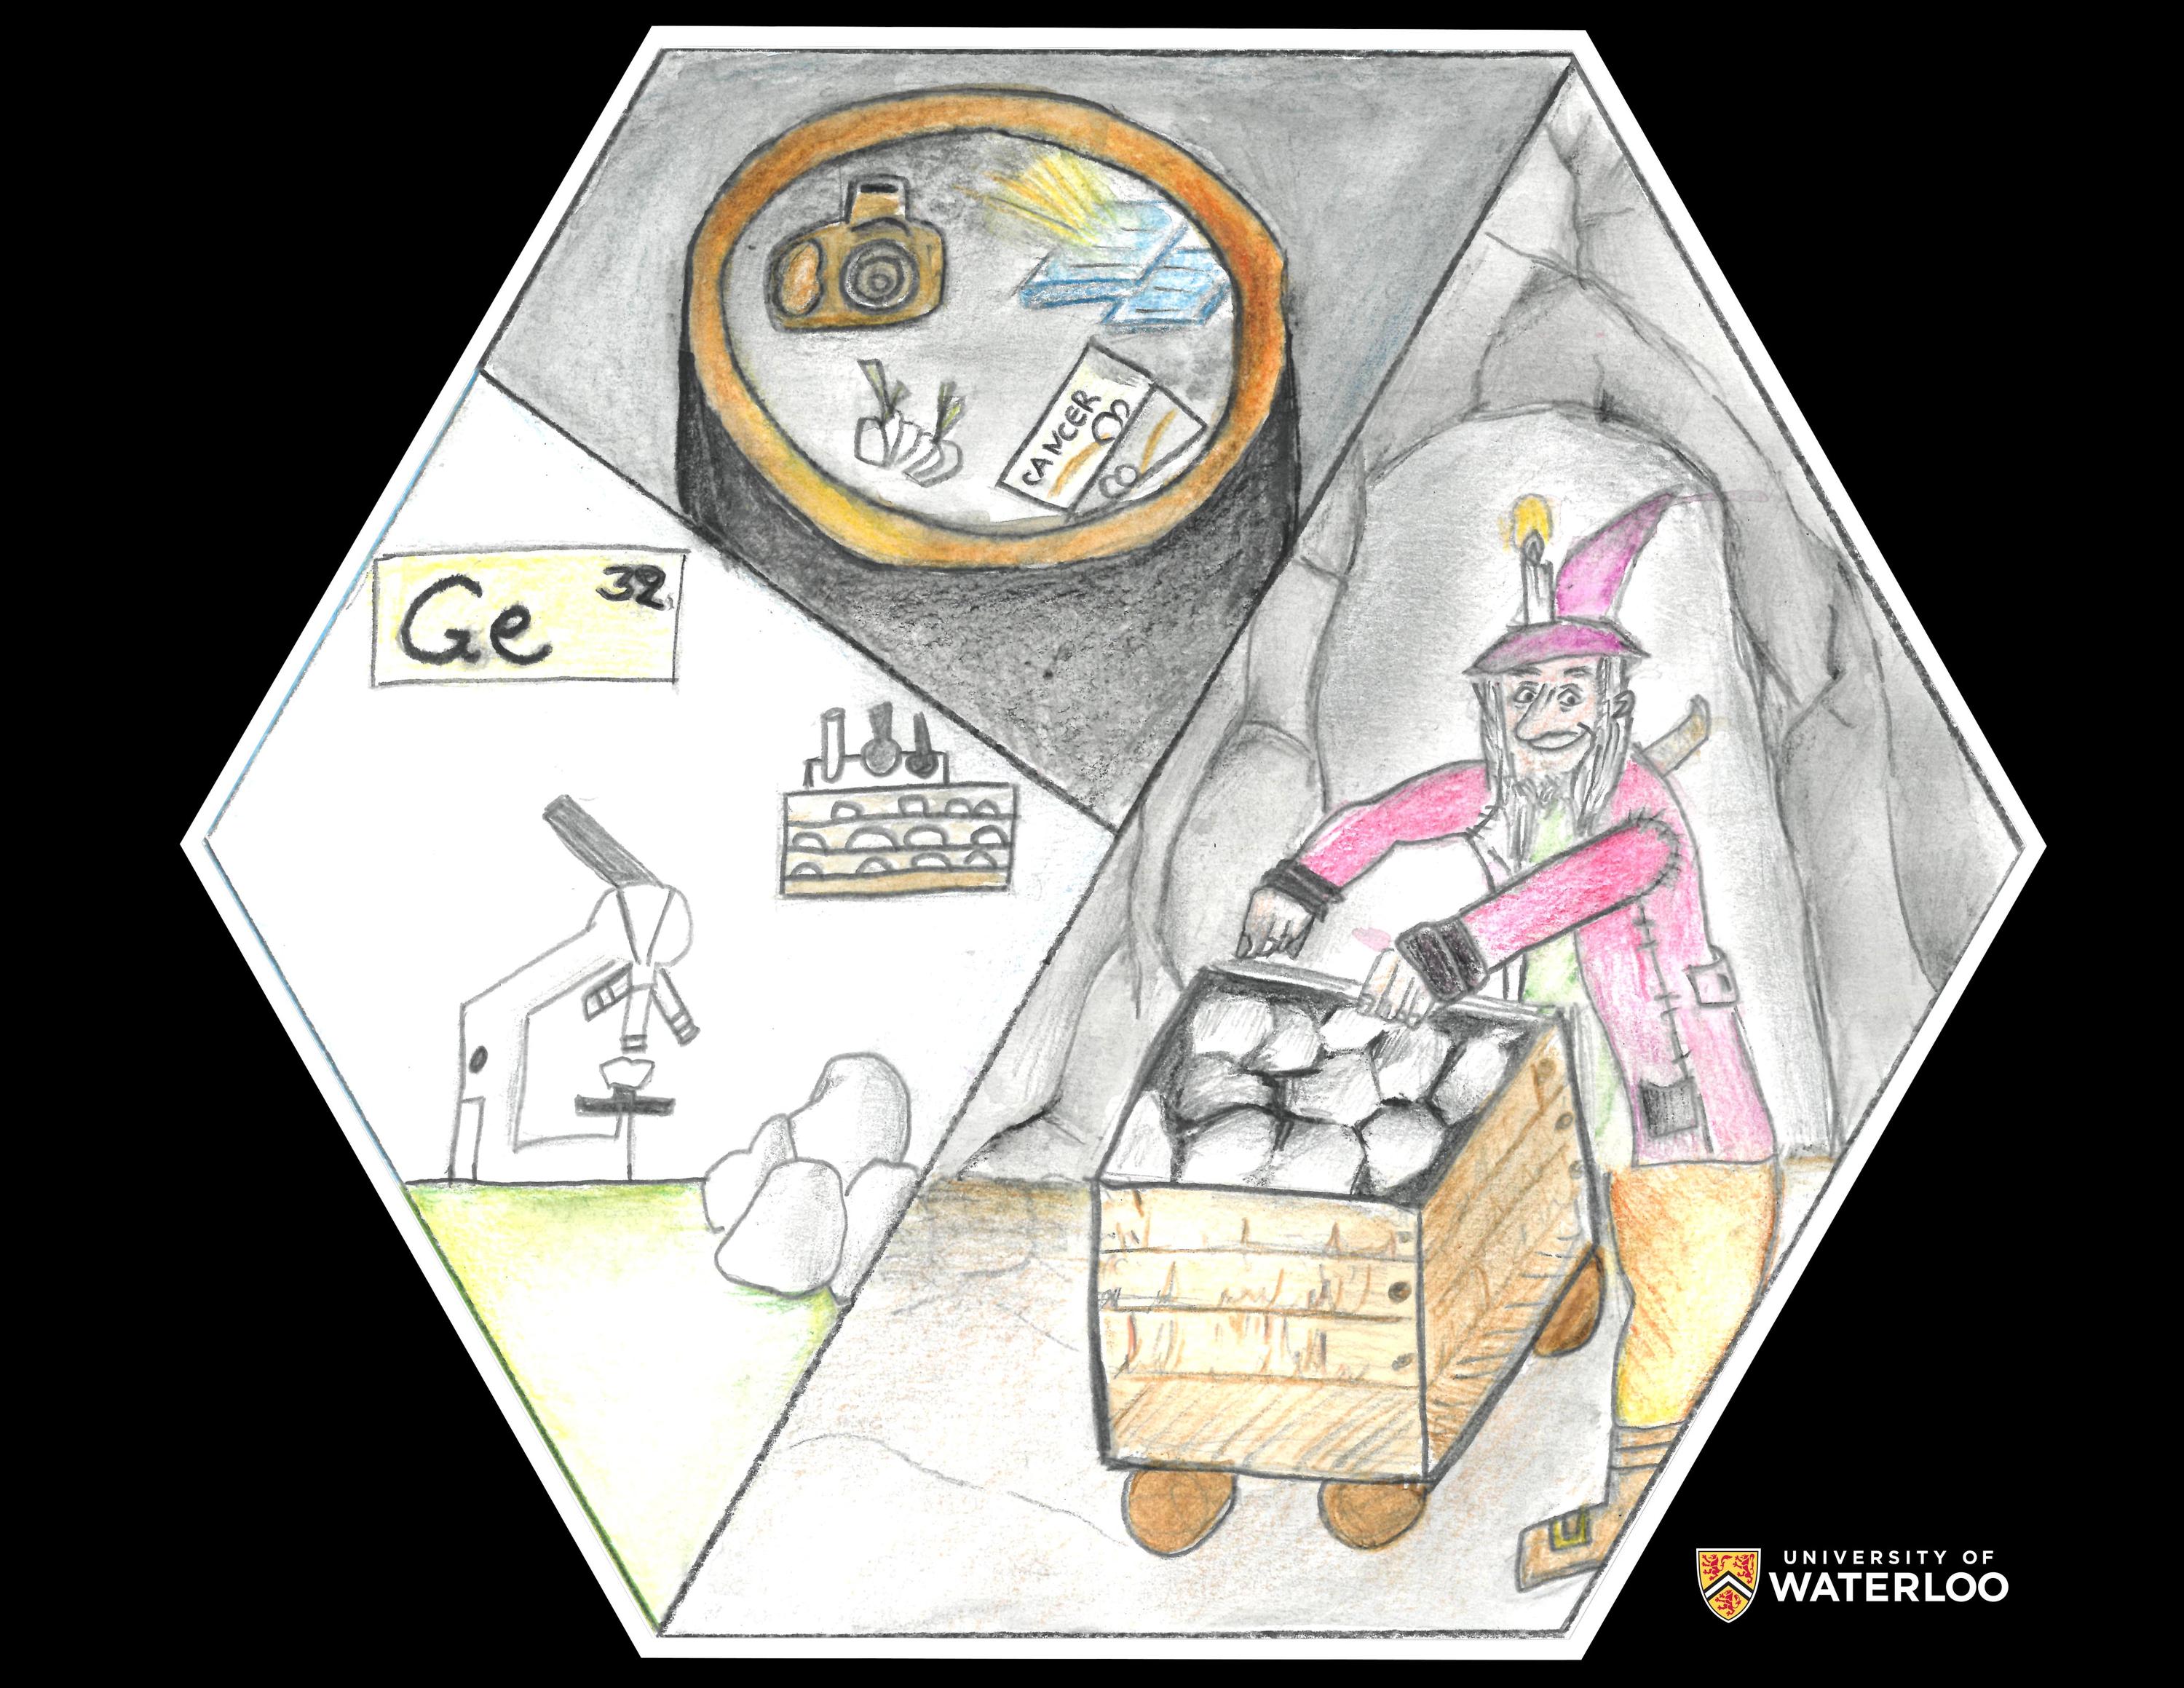 Coloured pencil on white paper. Tile divided into three images. Top left shows a camera, the word “cancer” and a fluorescent lamp emitting light. Bottom left is a lab with a microscope, the chemical symbol “Ge” and atomic number “32”. Right is a pre-industrial miner in a mine pushing a cart of mining debris.